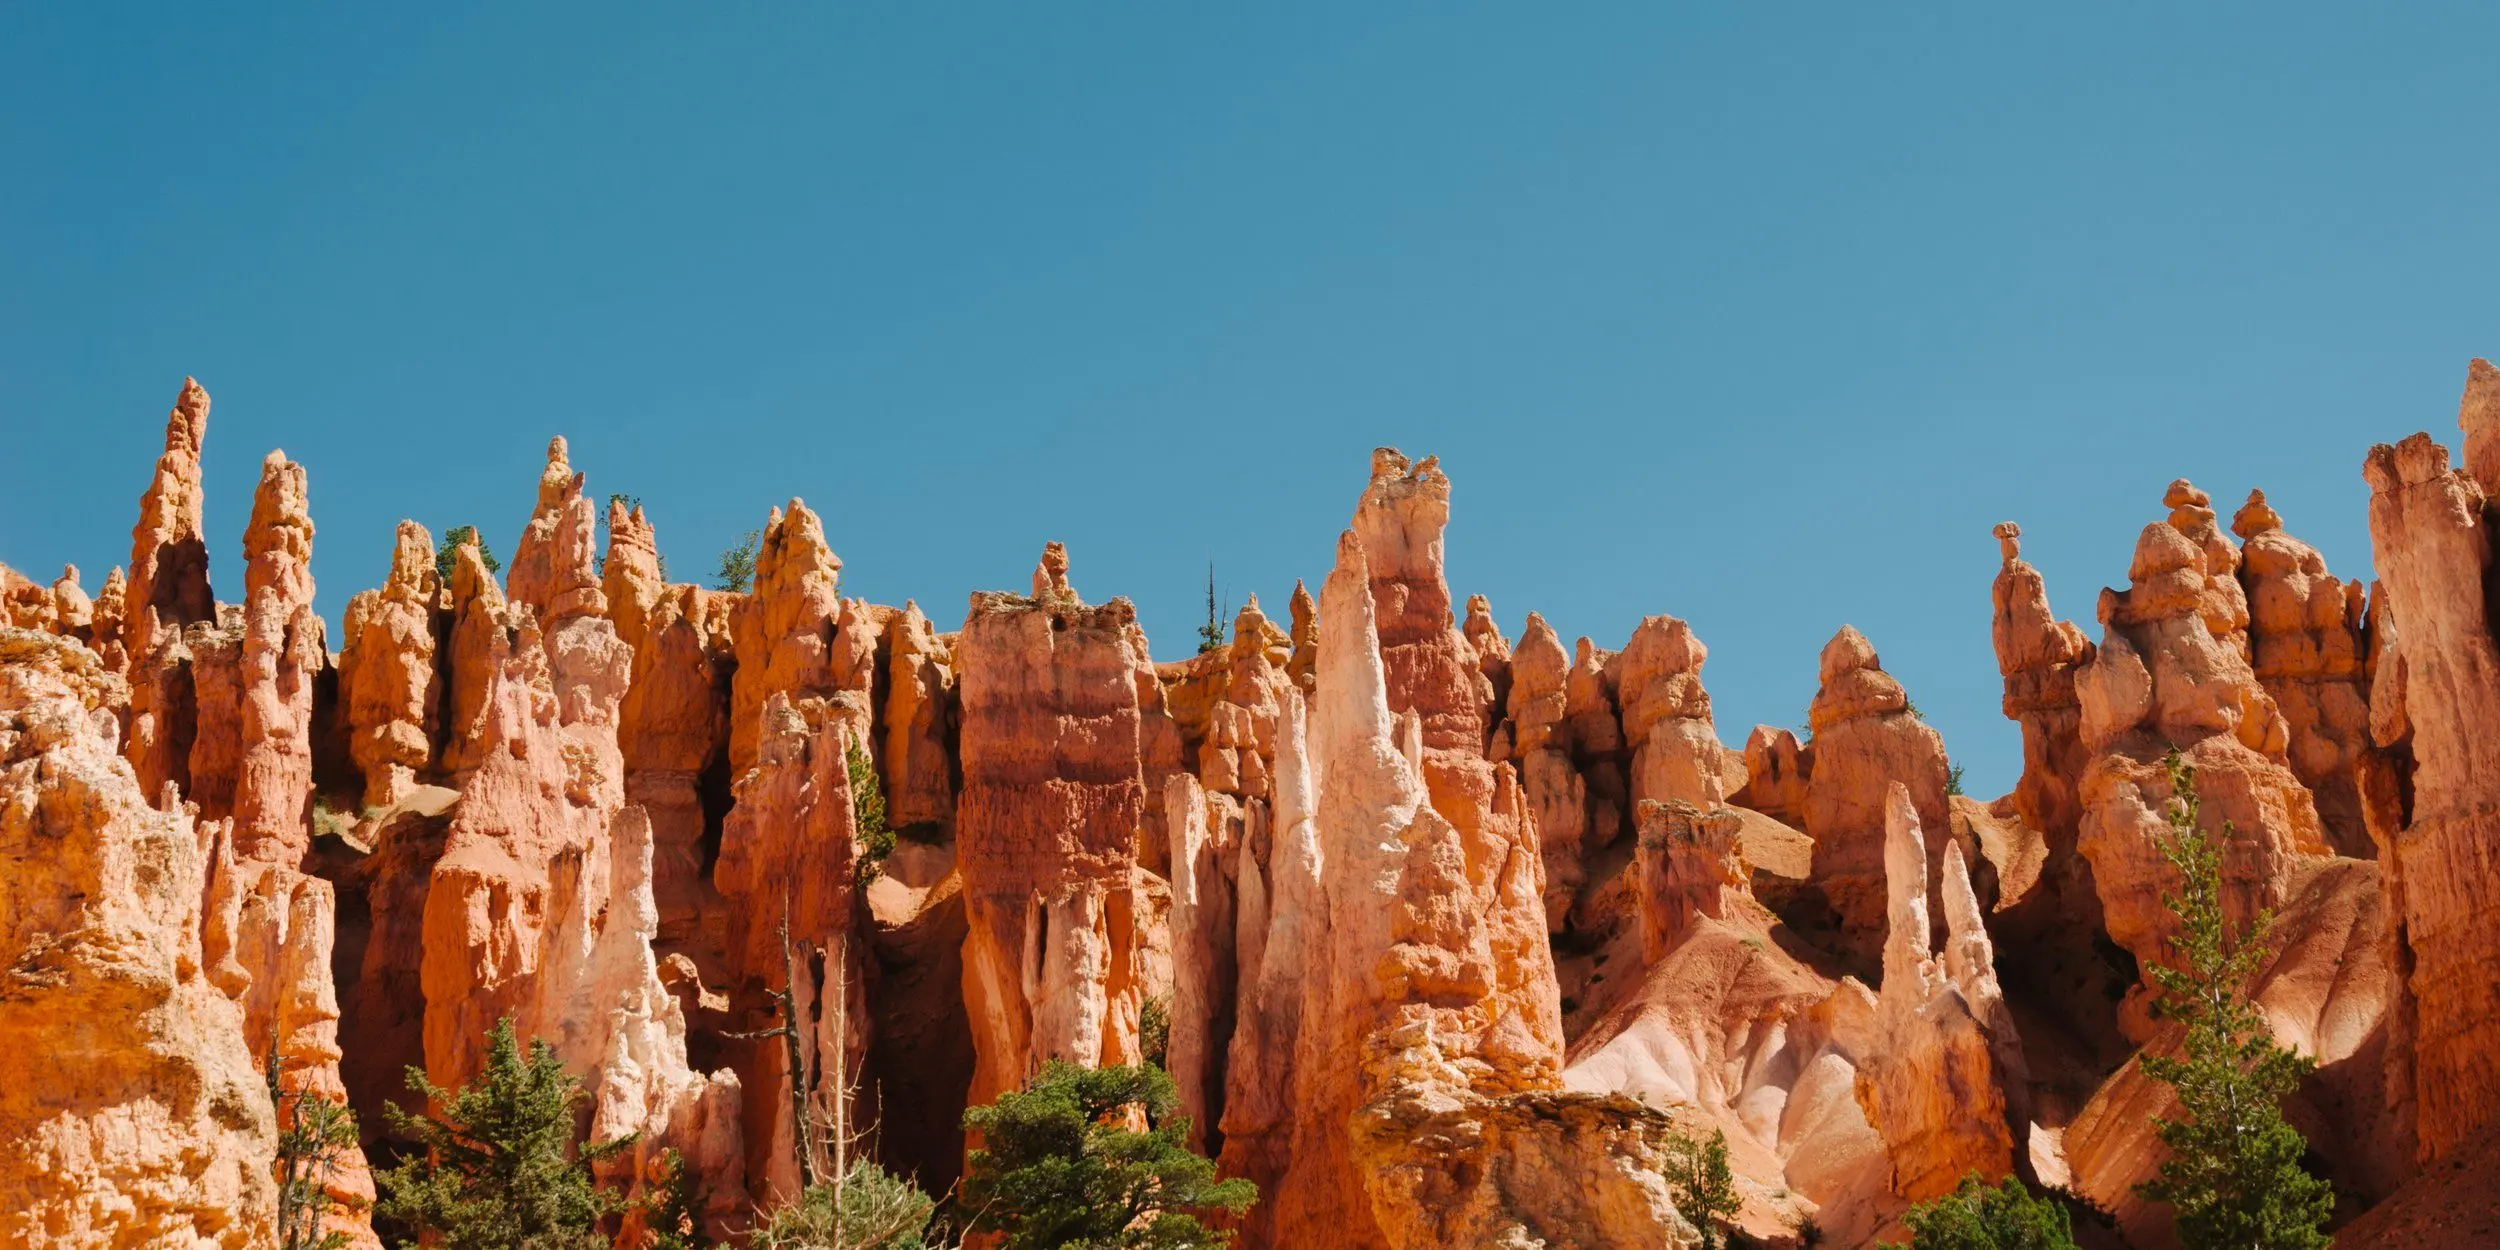 Orange Bryce Canyon hoodoos stand over green trees, all under clear blue skies through Queens Garden. Midday.